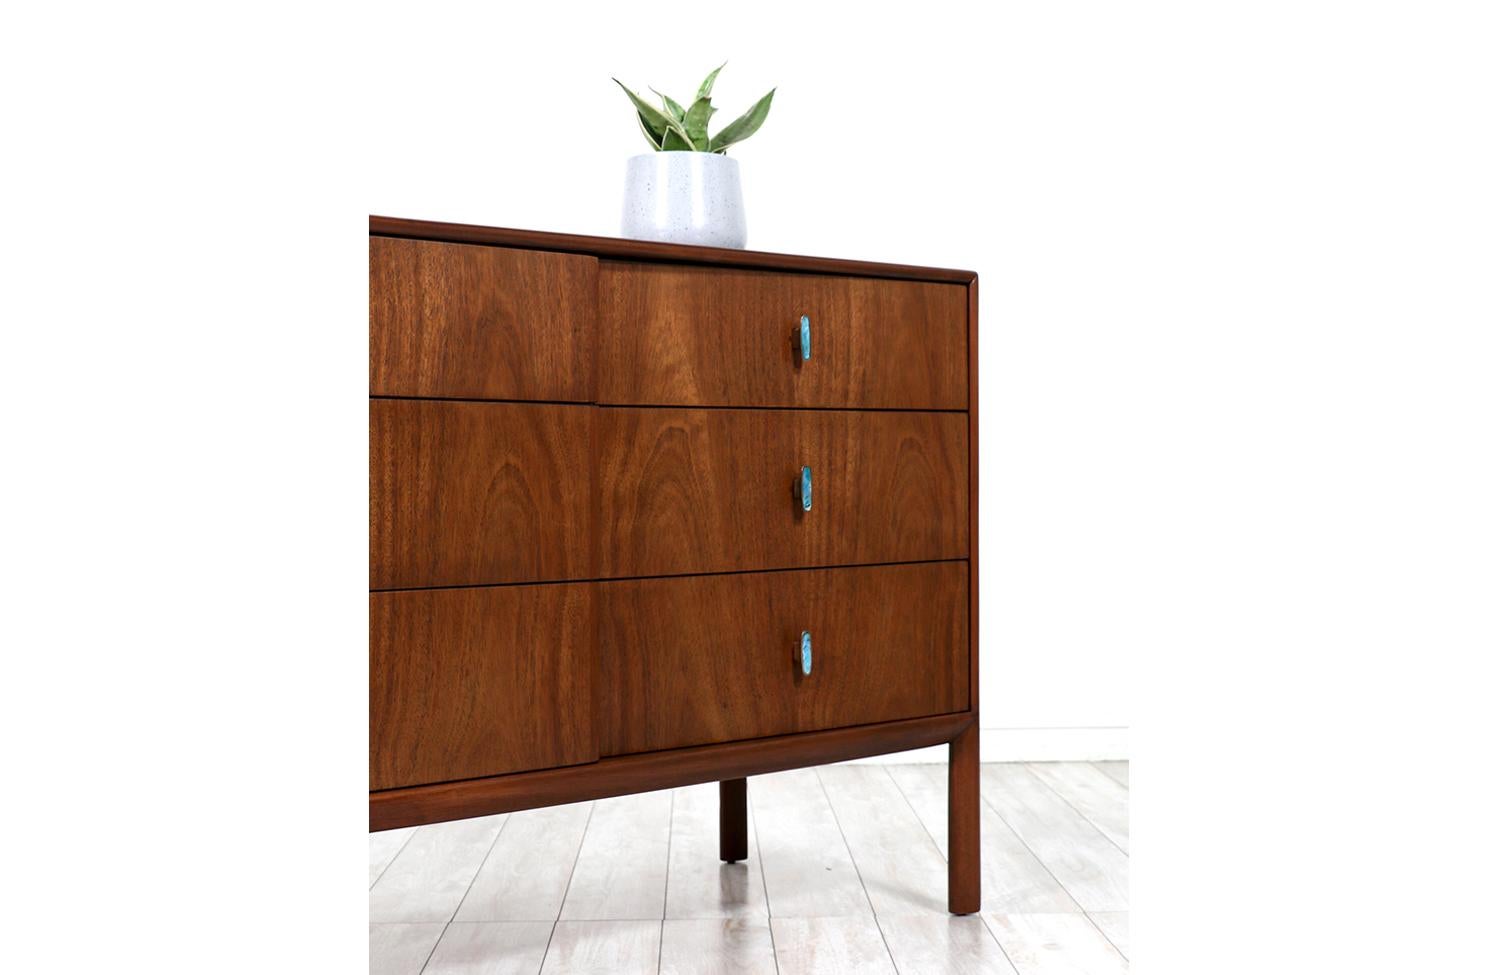 Mid-20th Century Mid-Century Modern Dresser with Turquoise Enameled Inlaid Pulls